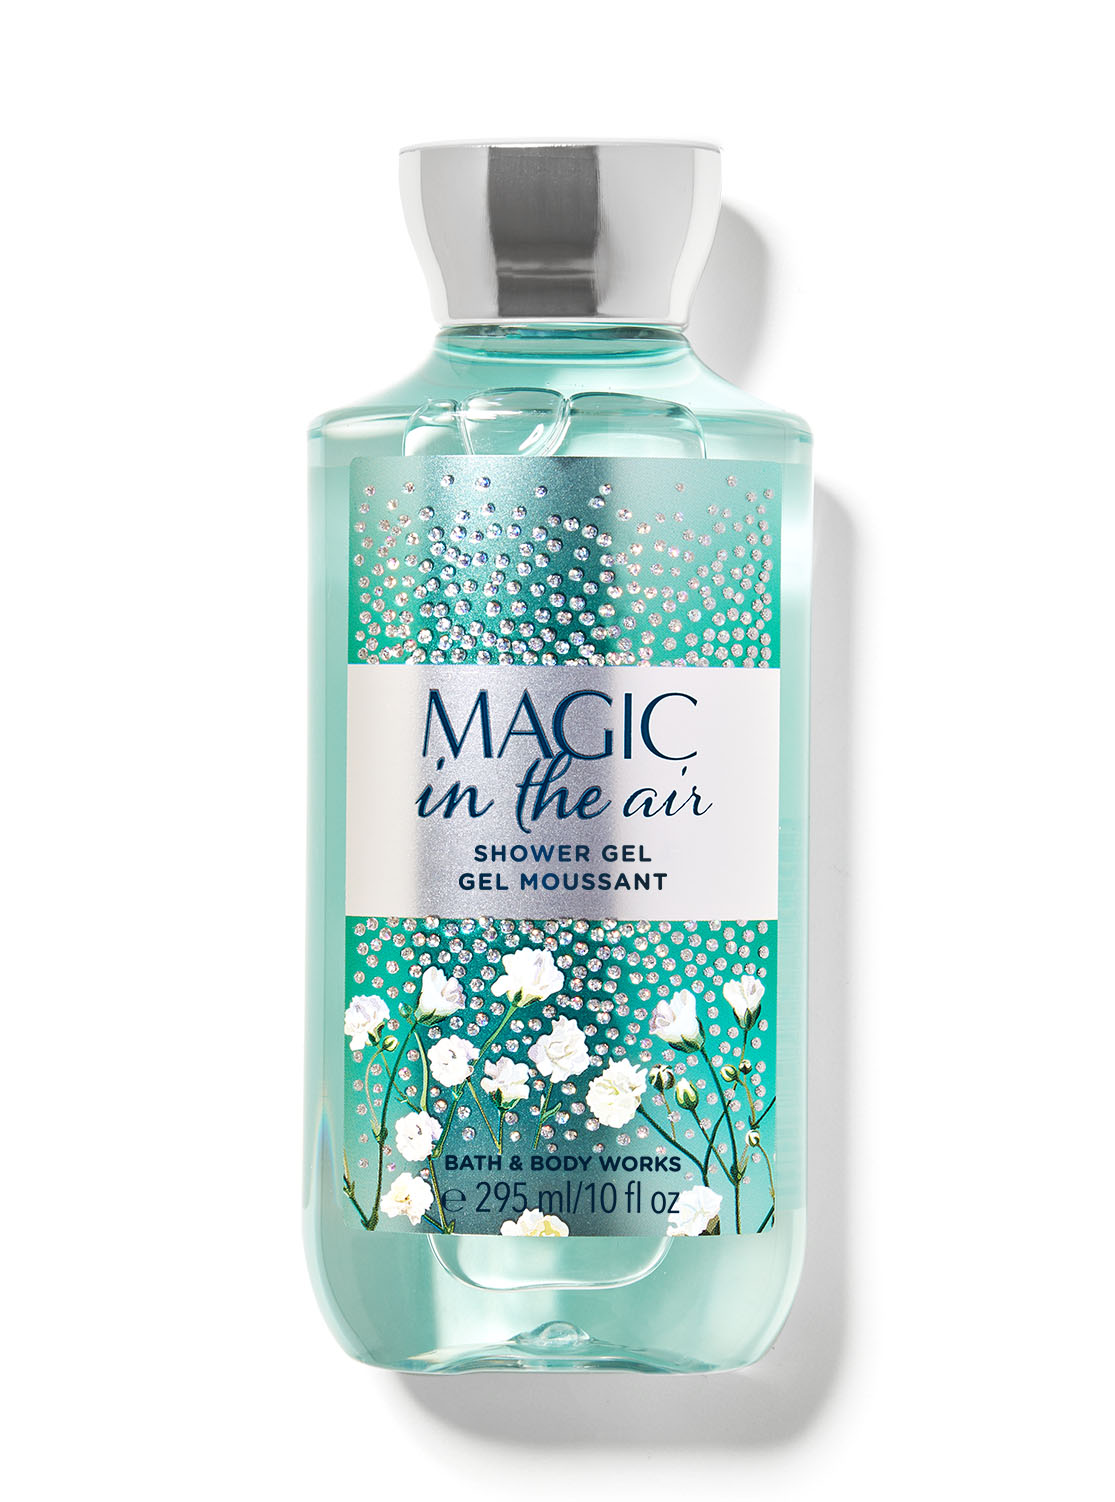  Bath and Body Works Magic In The Air Shower Gel Gift Sets 10 Oz  2 Pack (Magic In The Air)